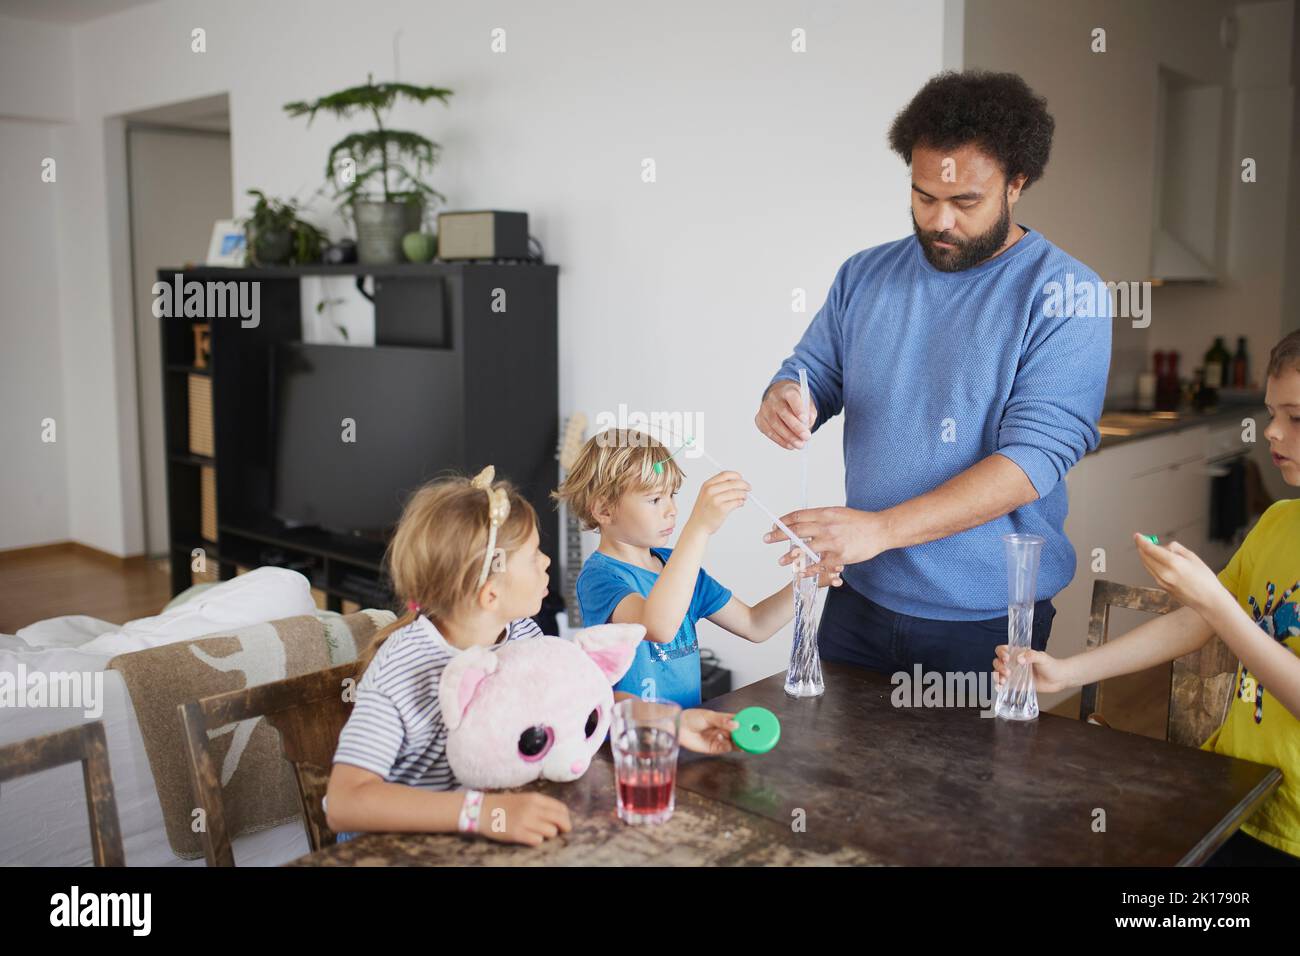 Father taking care of children at home Stock Photo